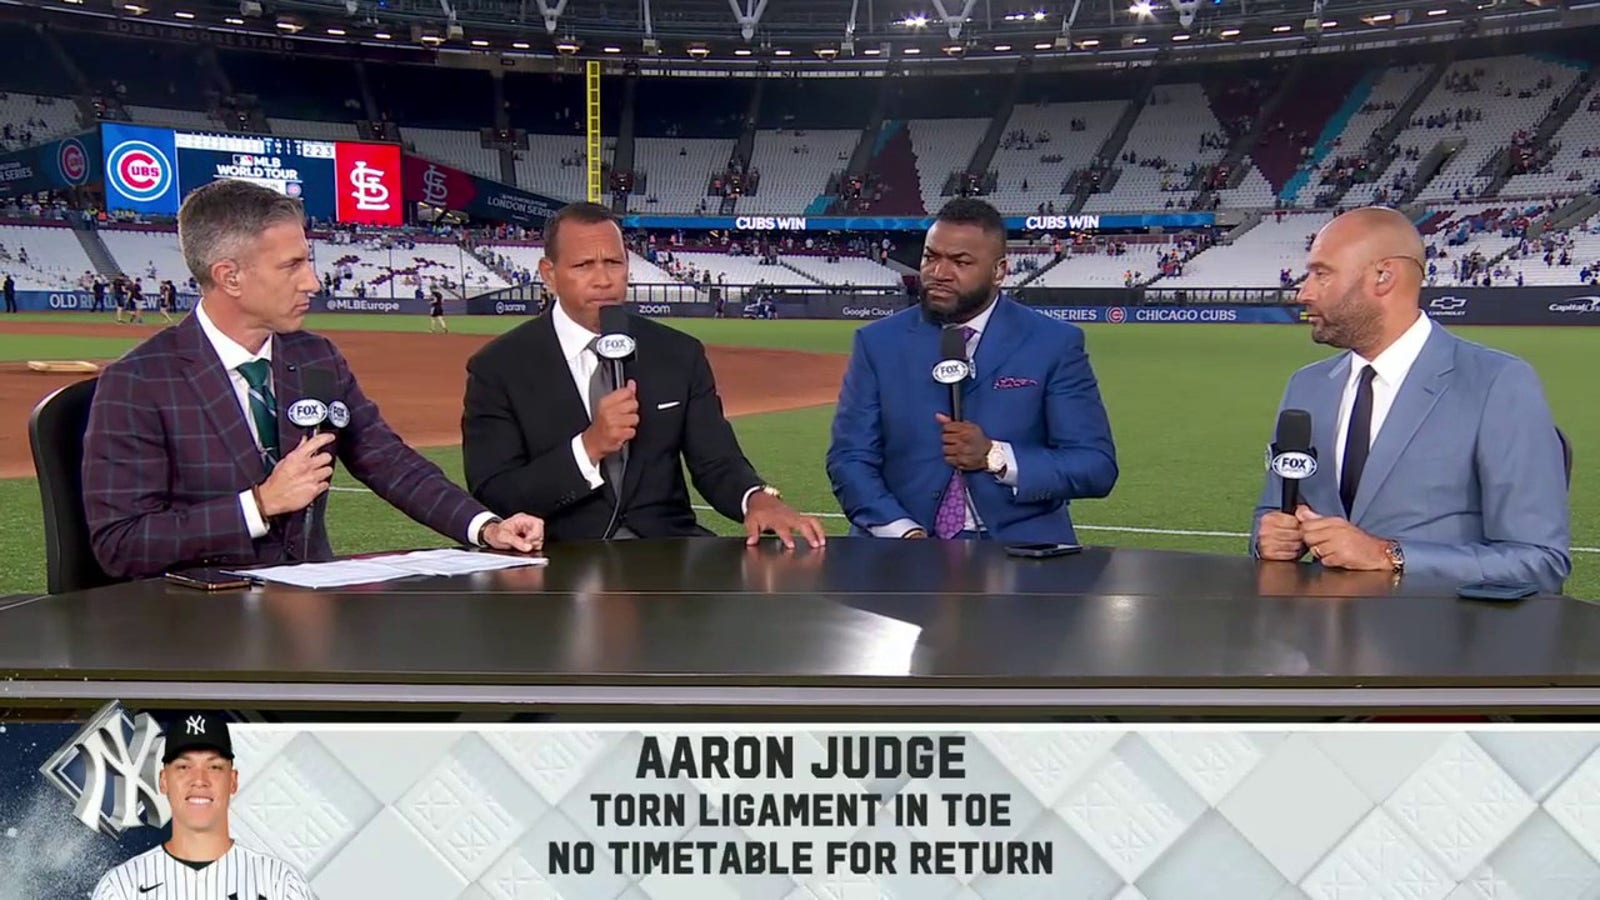 'MLB on FOX' crew discuss Judge's injury and its repercussions on Yankees